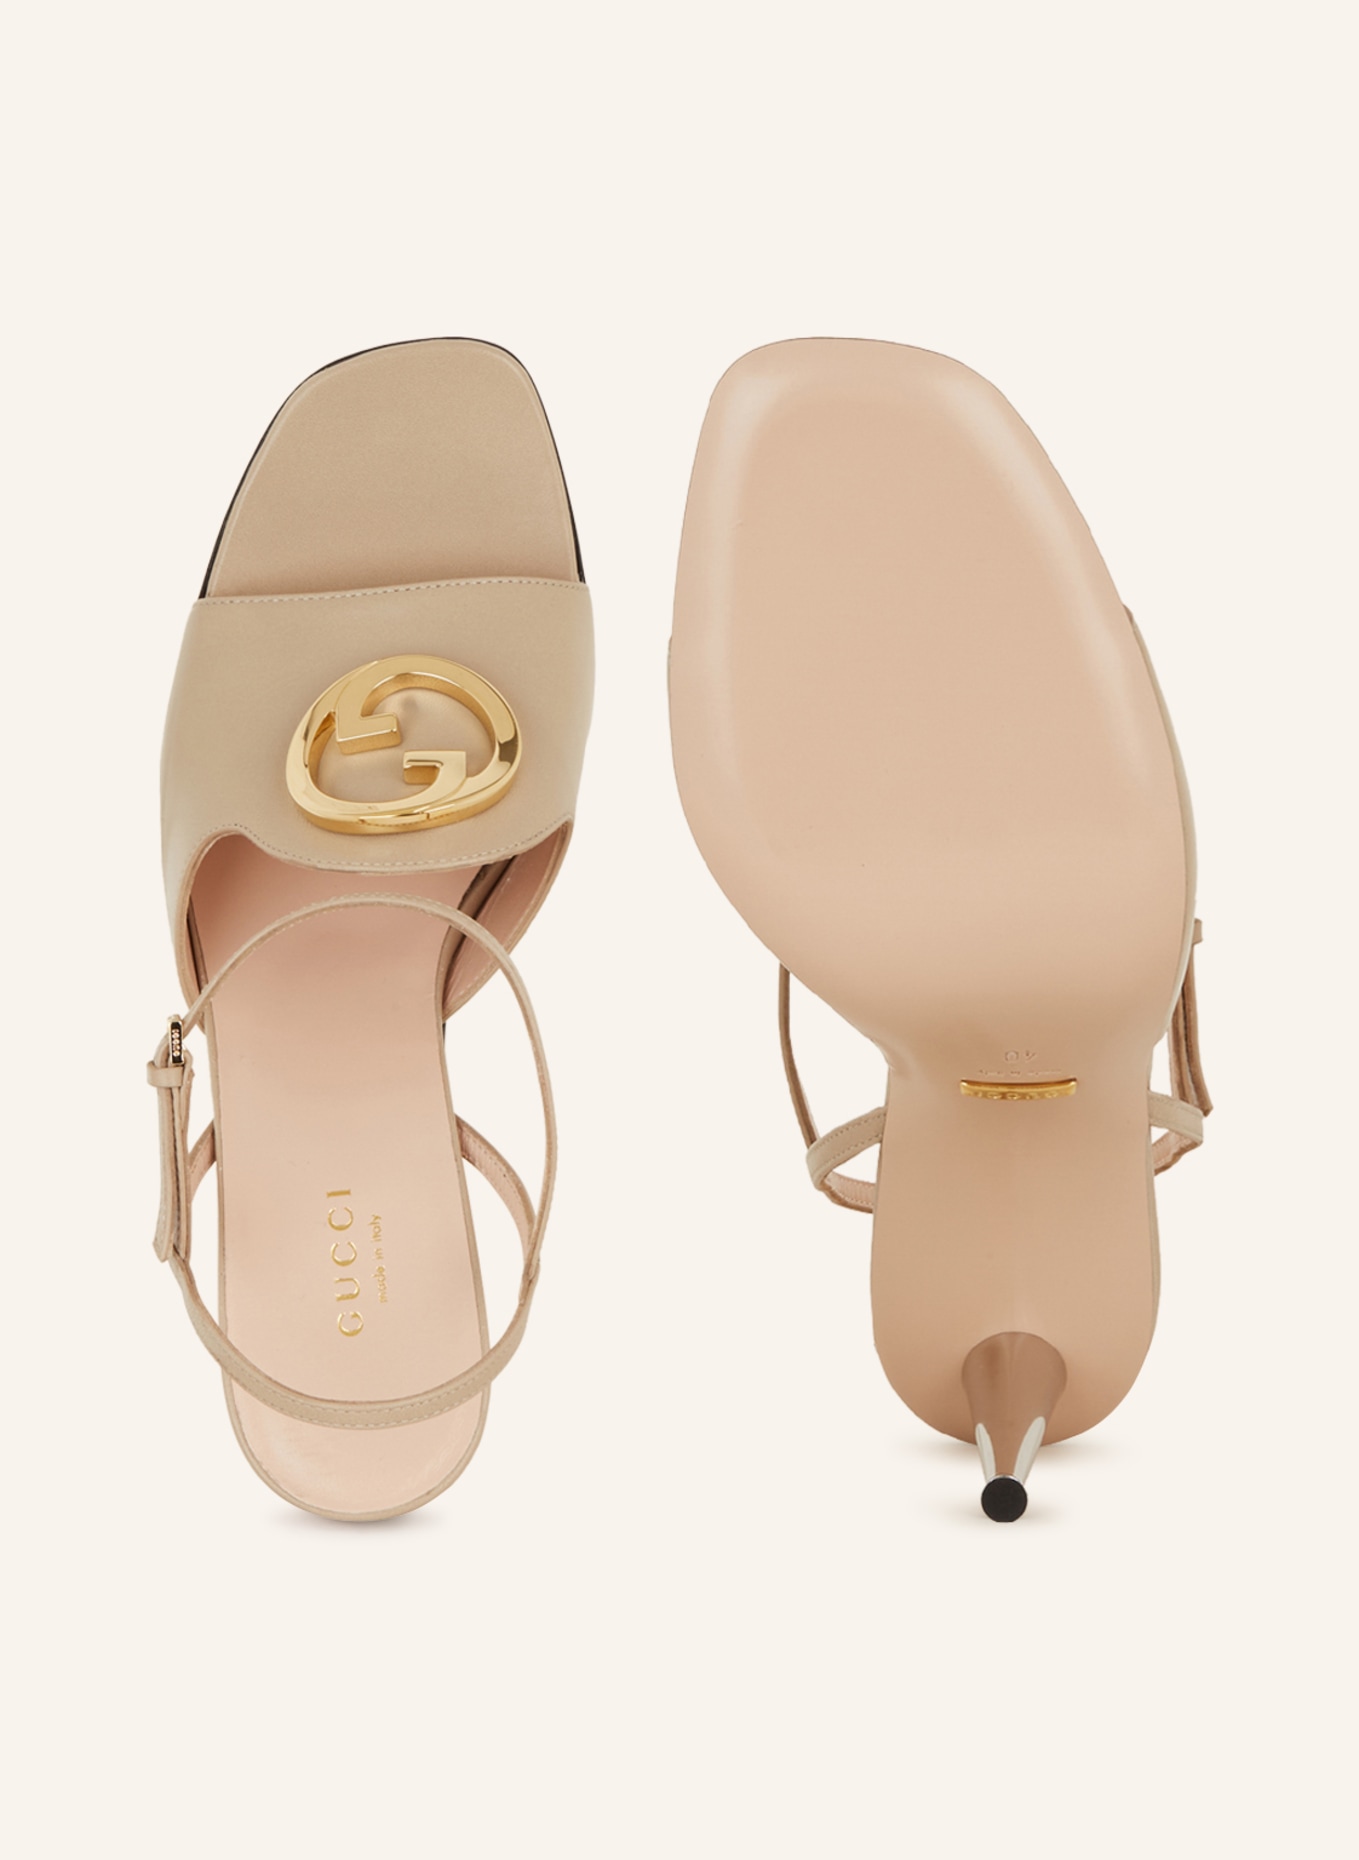 GUCCI Sandals, Color: 9511 OATMEAL (Image 5)